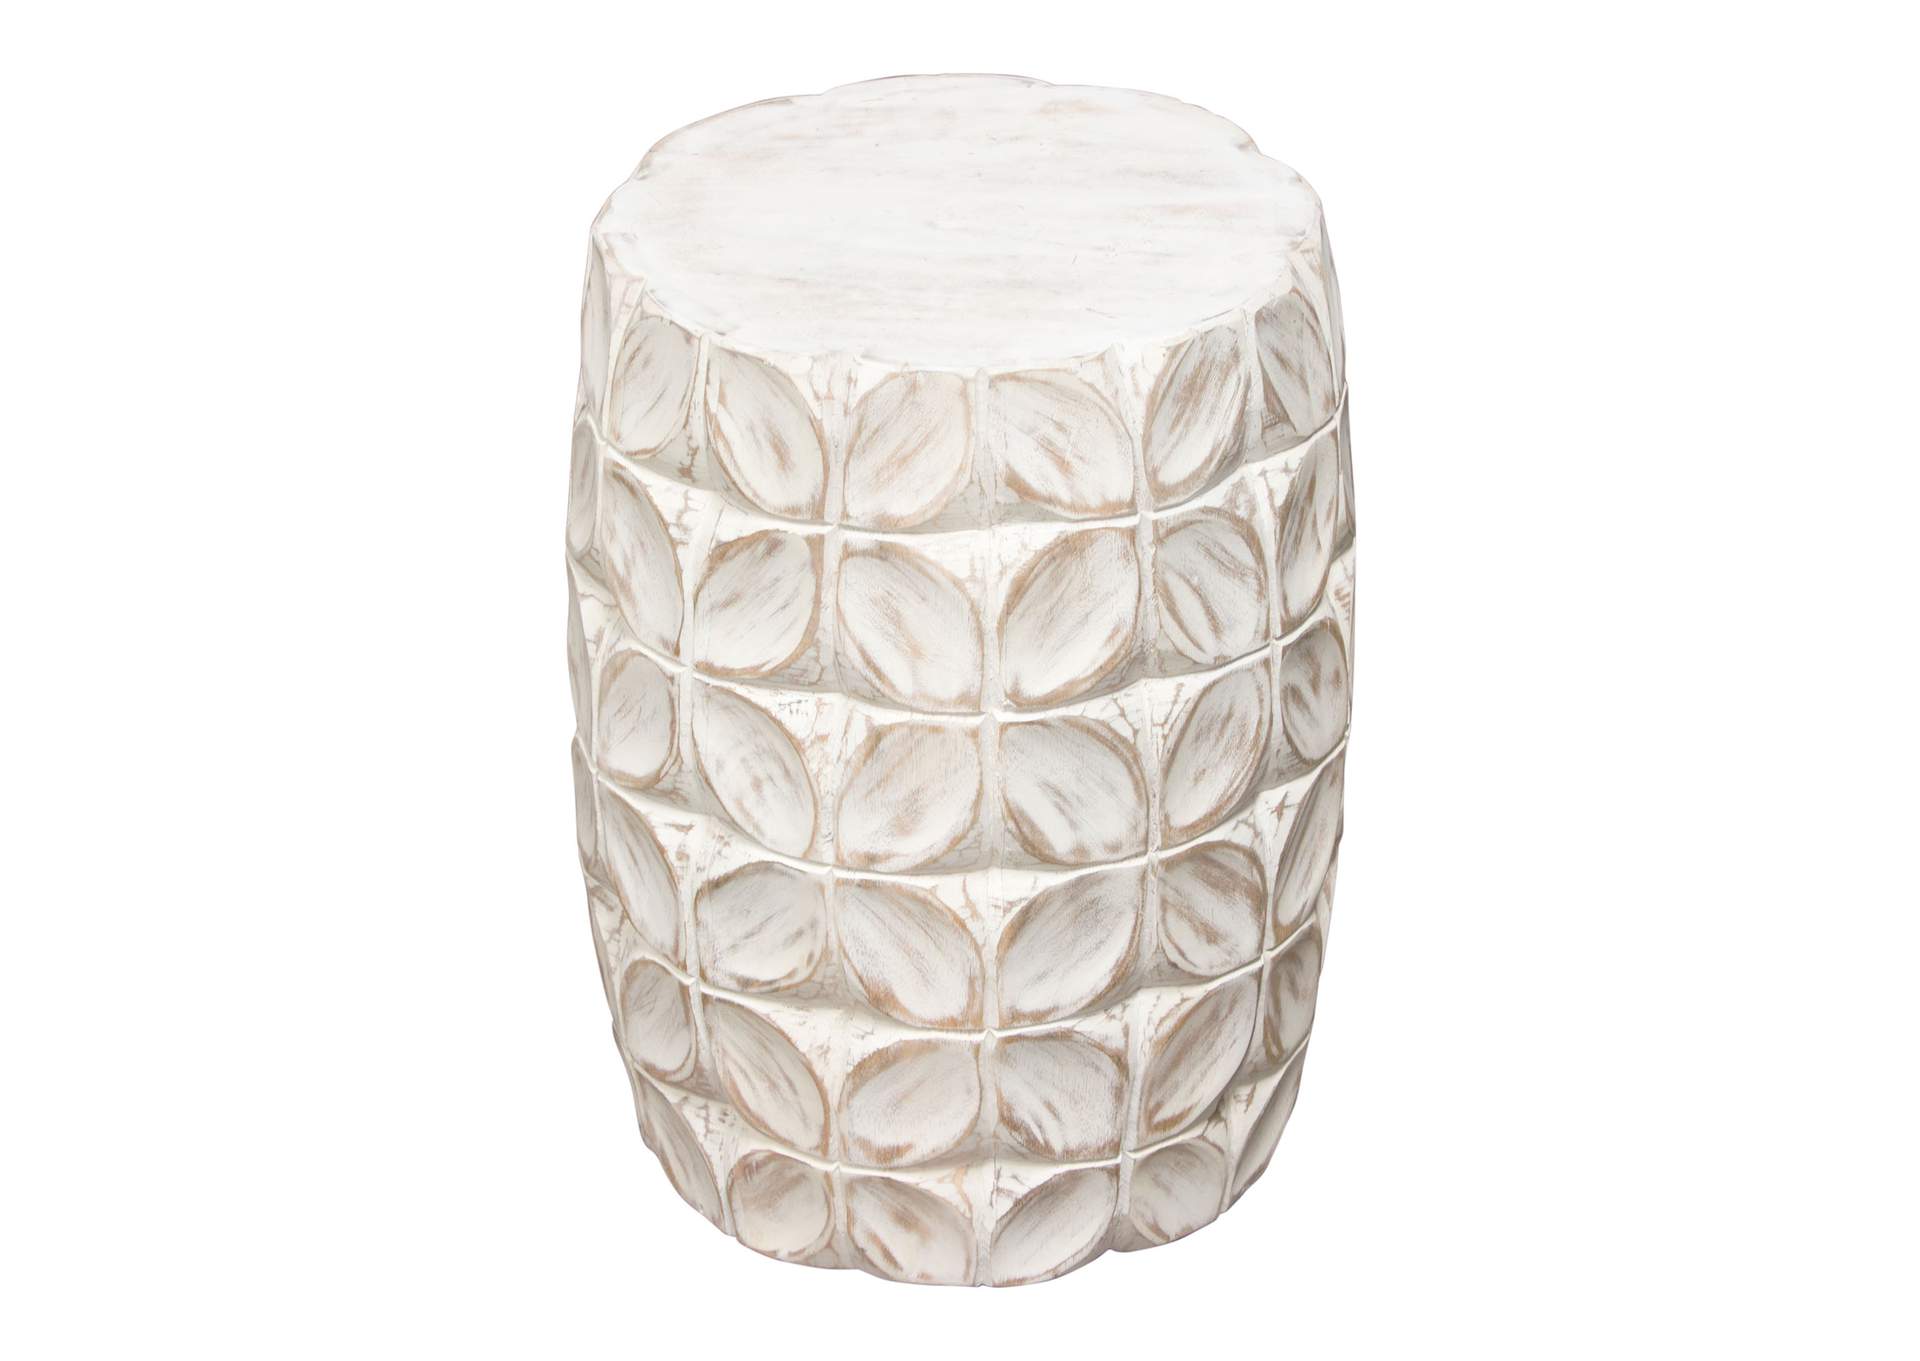 Fig Solid Mango Wood Accent Table in Distressed White Finish w/ Leaf Motif by Diamond Sofa,Diamond Sofa